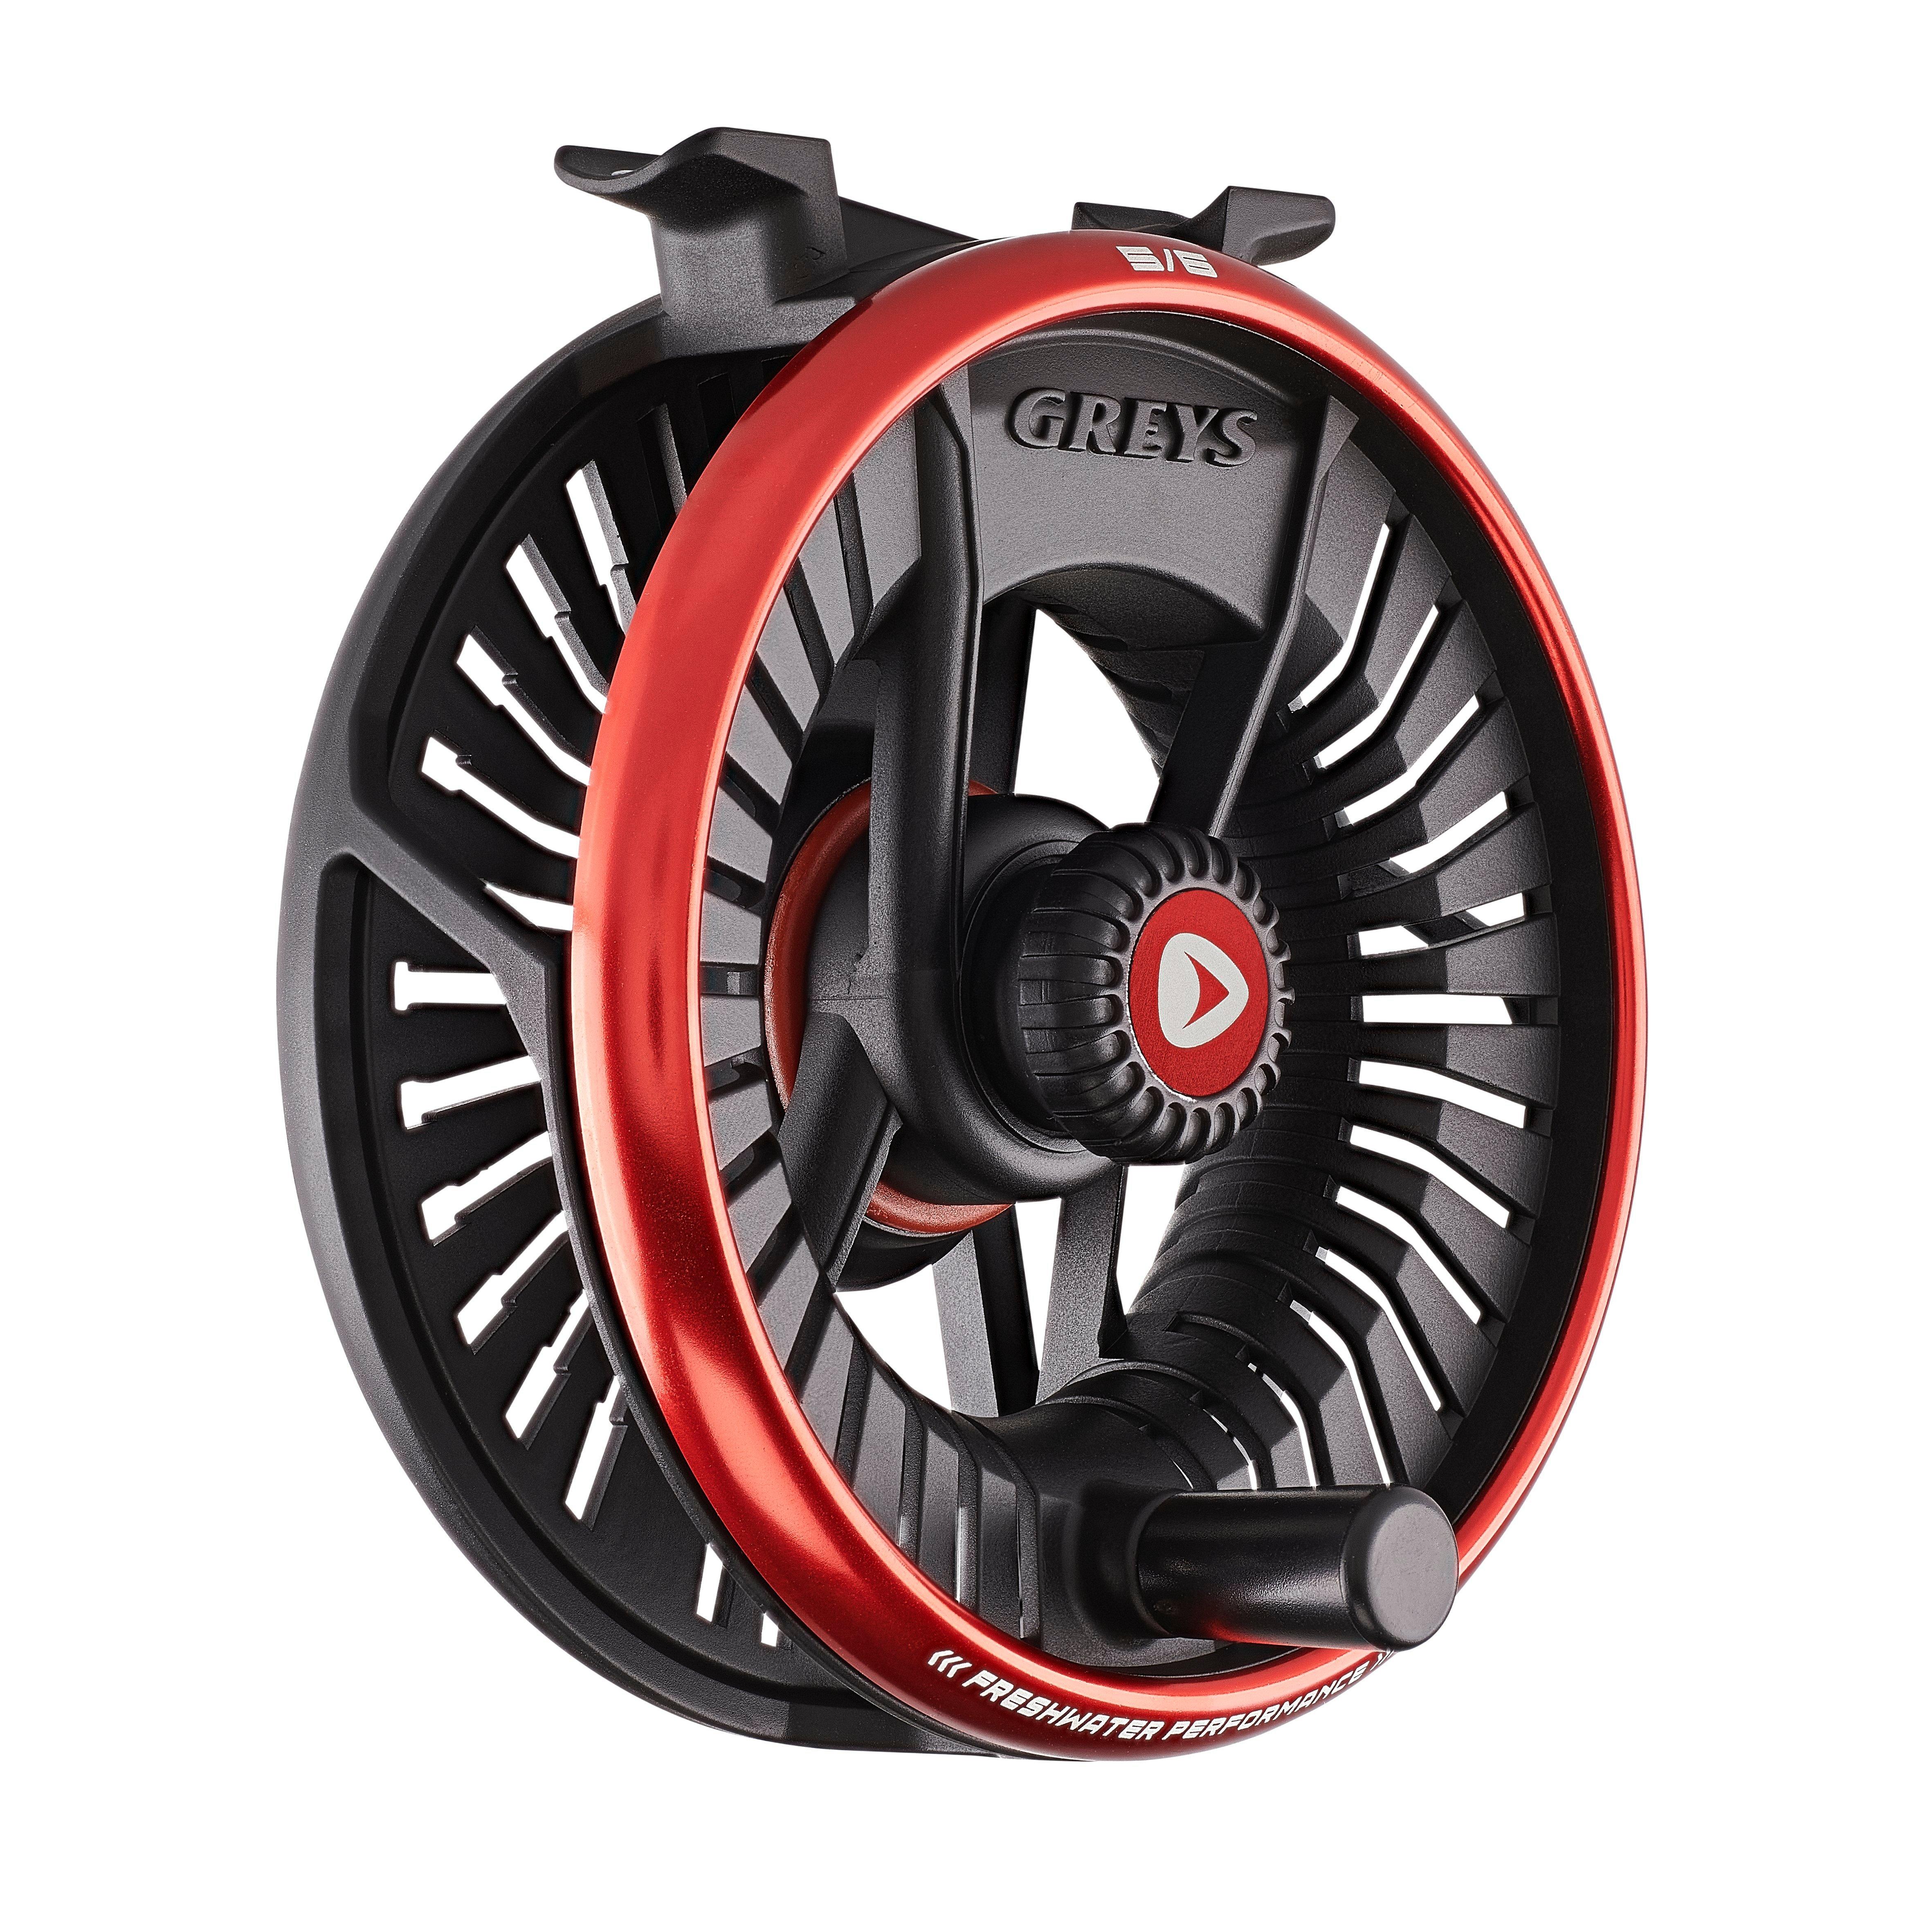 https://op1.0ps.us/original/opplanet-greys-tail-spare-spool-reel-1-0-1-right-left-3-4-black-red-gsptail34-main